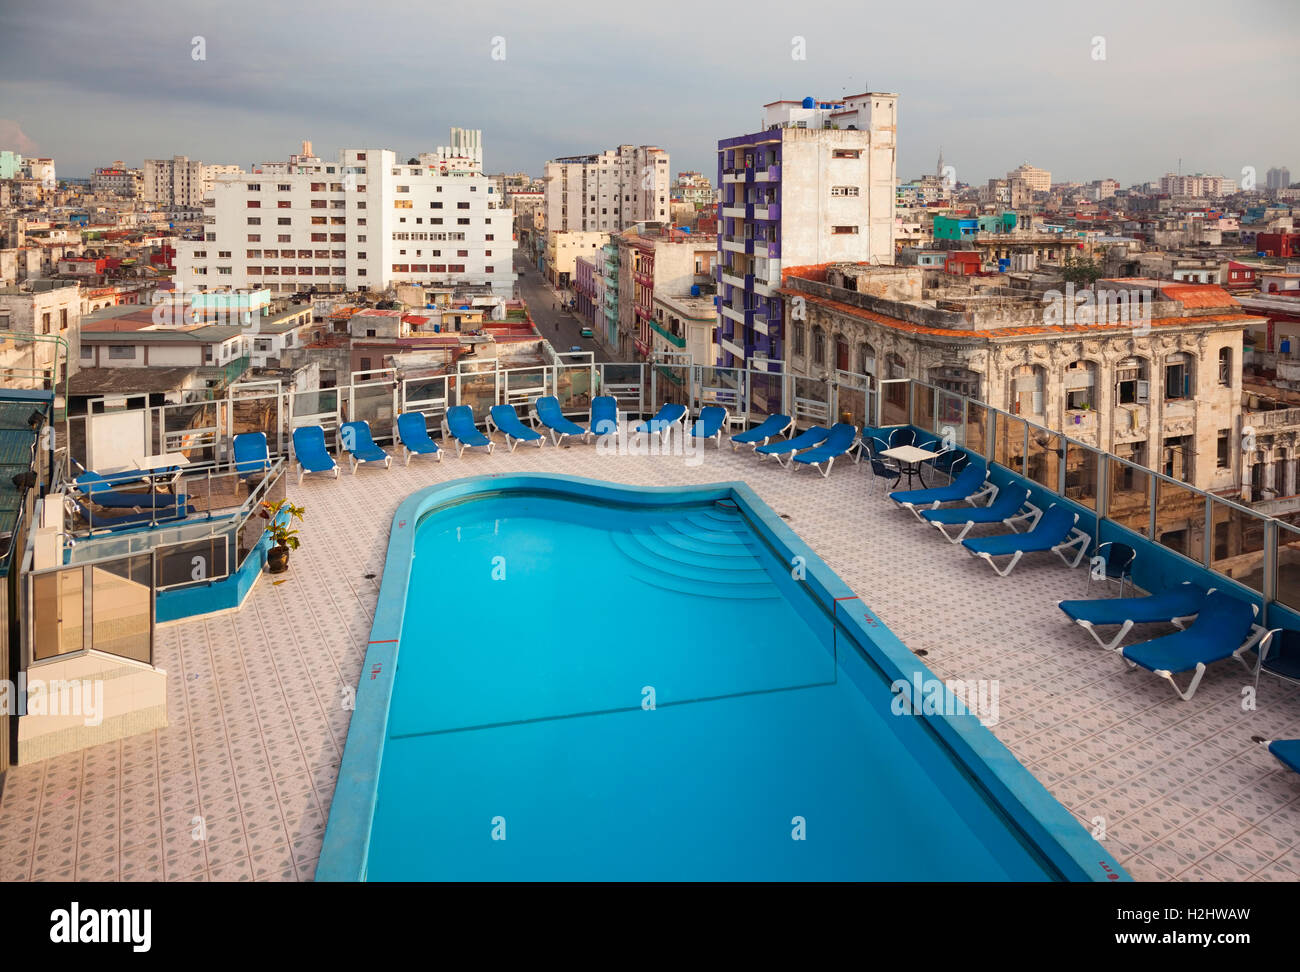 The rooftop pool at Hotel Deauville in Central Havana, Cuba. Stock Photo